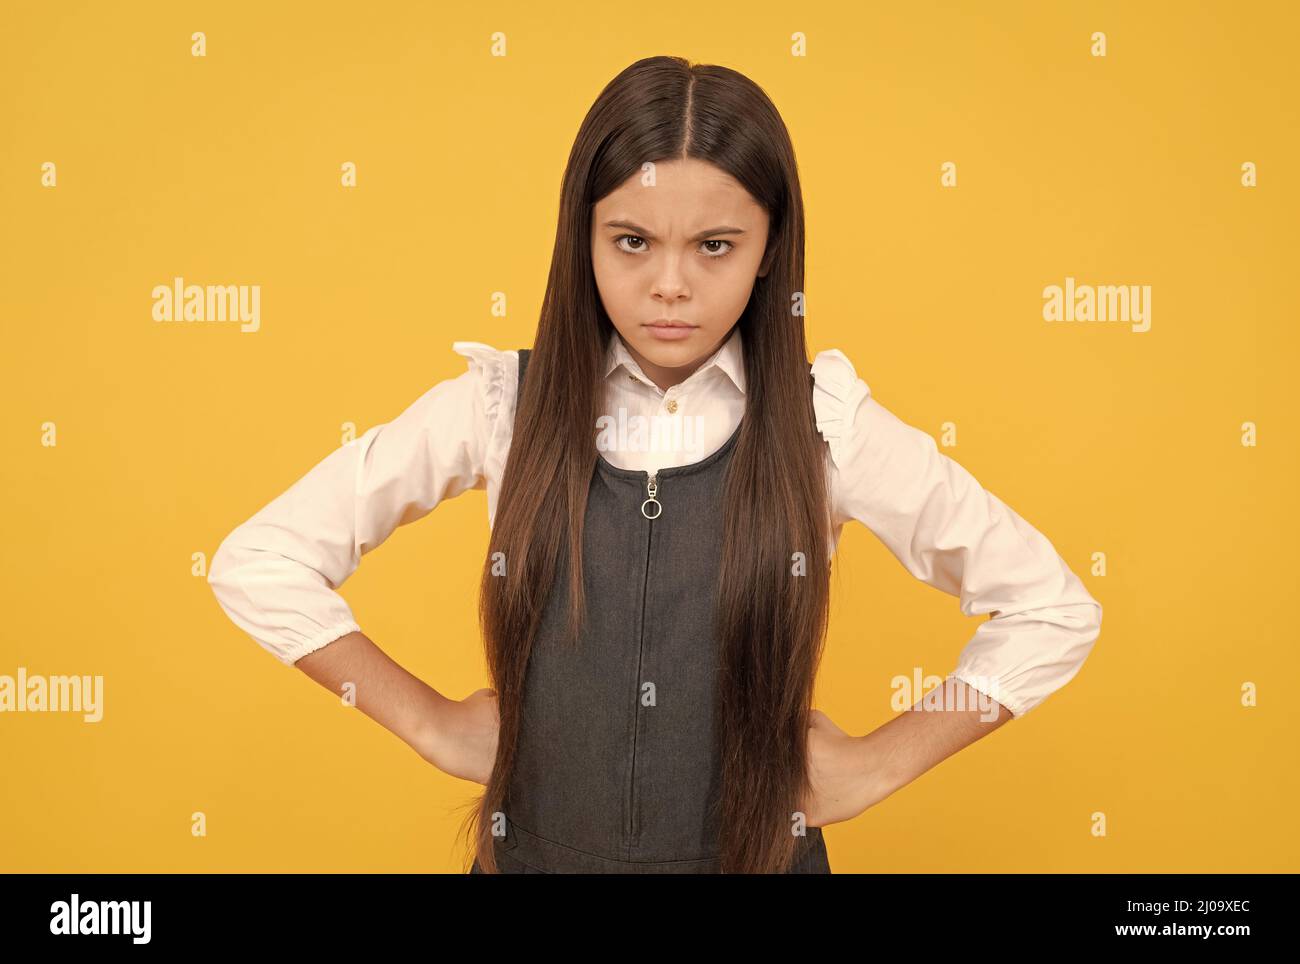 Becoming disobedient. Disobedient child yellow background. Frown girl stand with arms akimbo Stock Photo